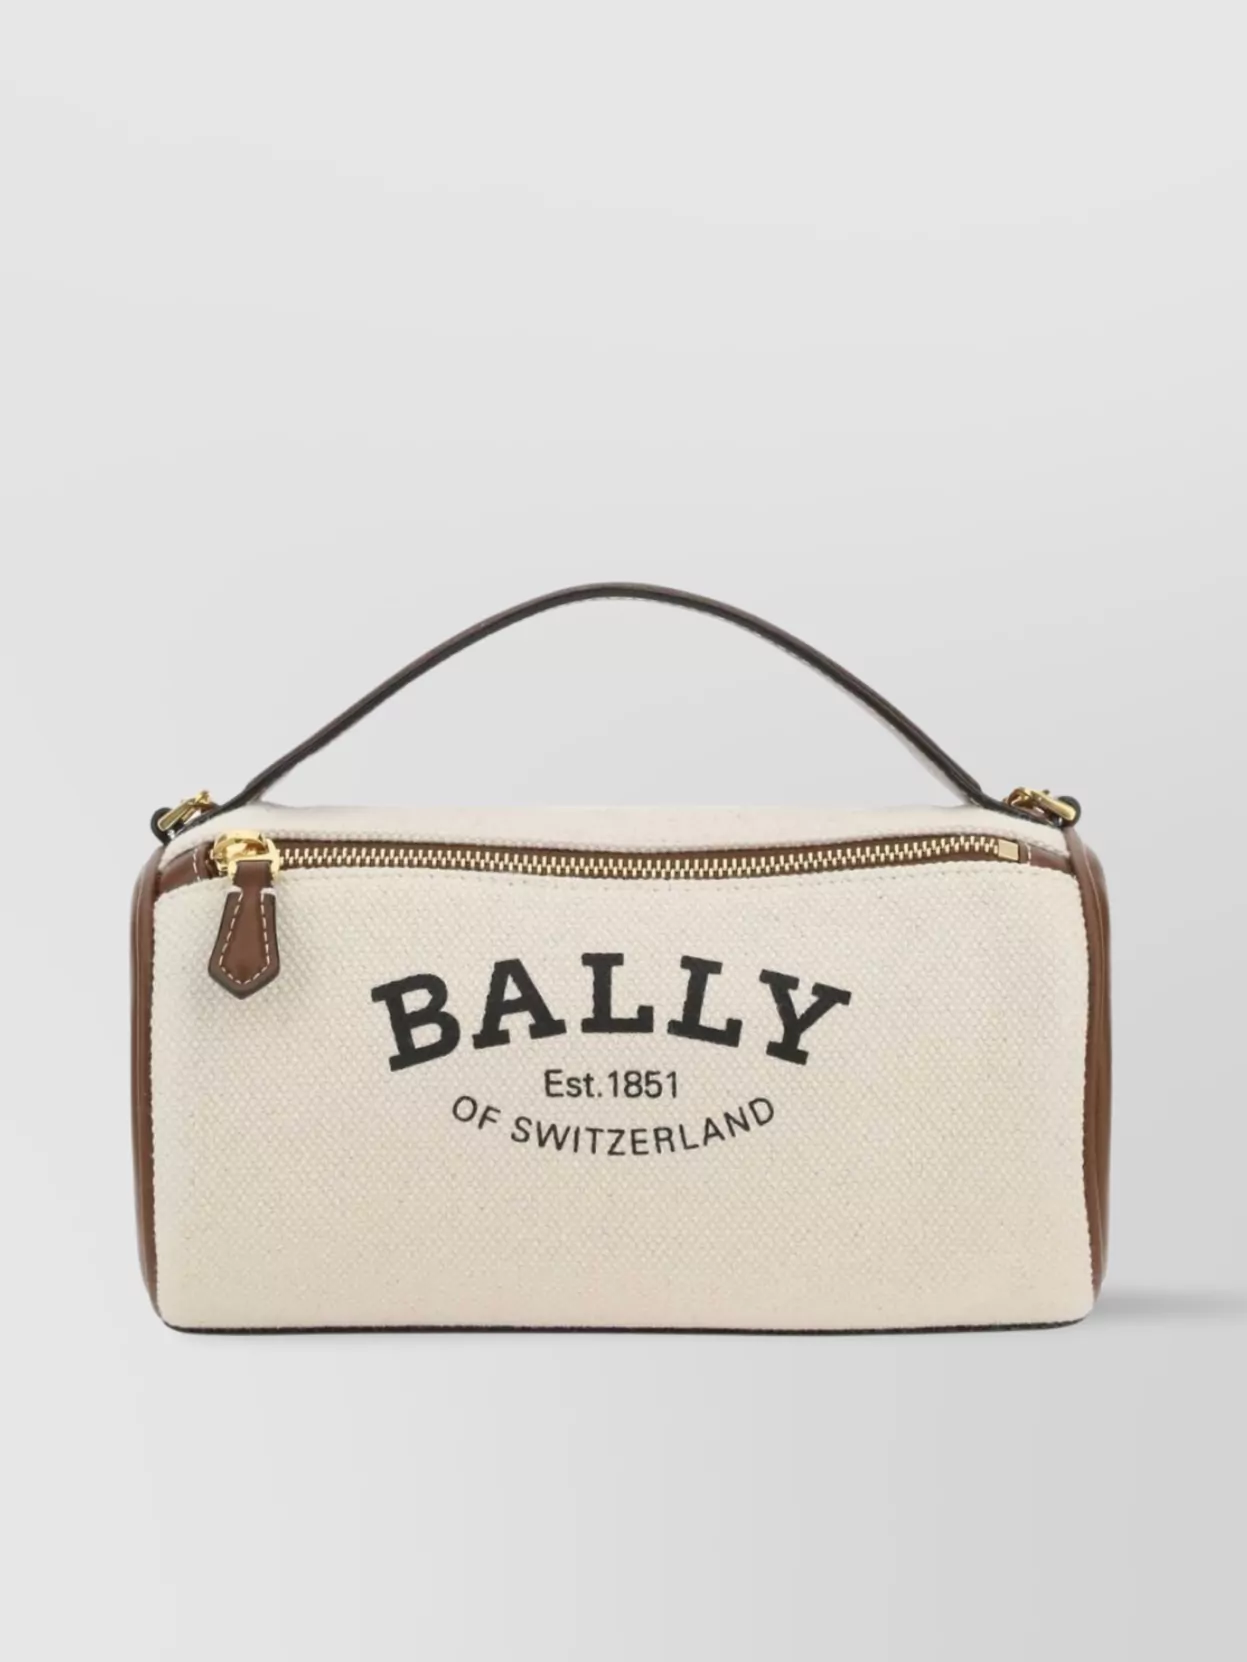 Shop Bally Canvas And Leather Handbag With Round Handle And Contrast Piping